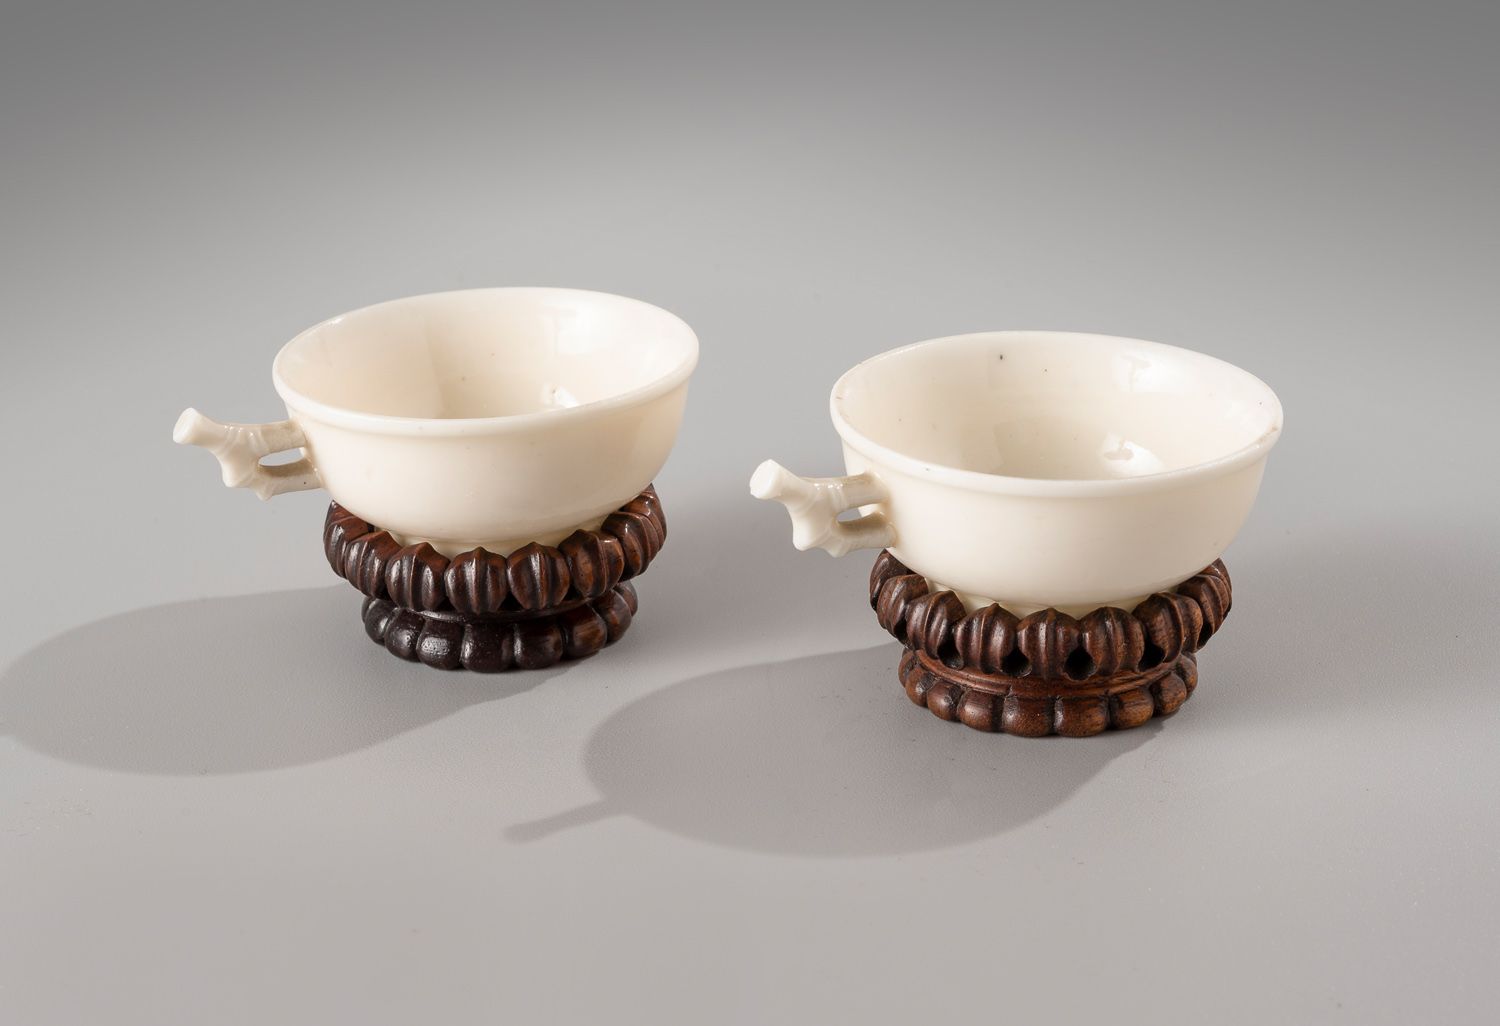 Null CHINA, Kangxi period, 18th century

Pair of small tea cups in China White, &hellip;